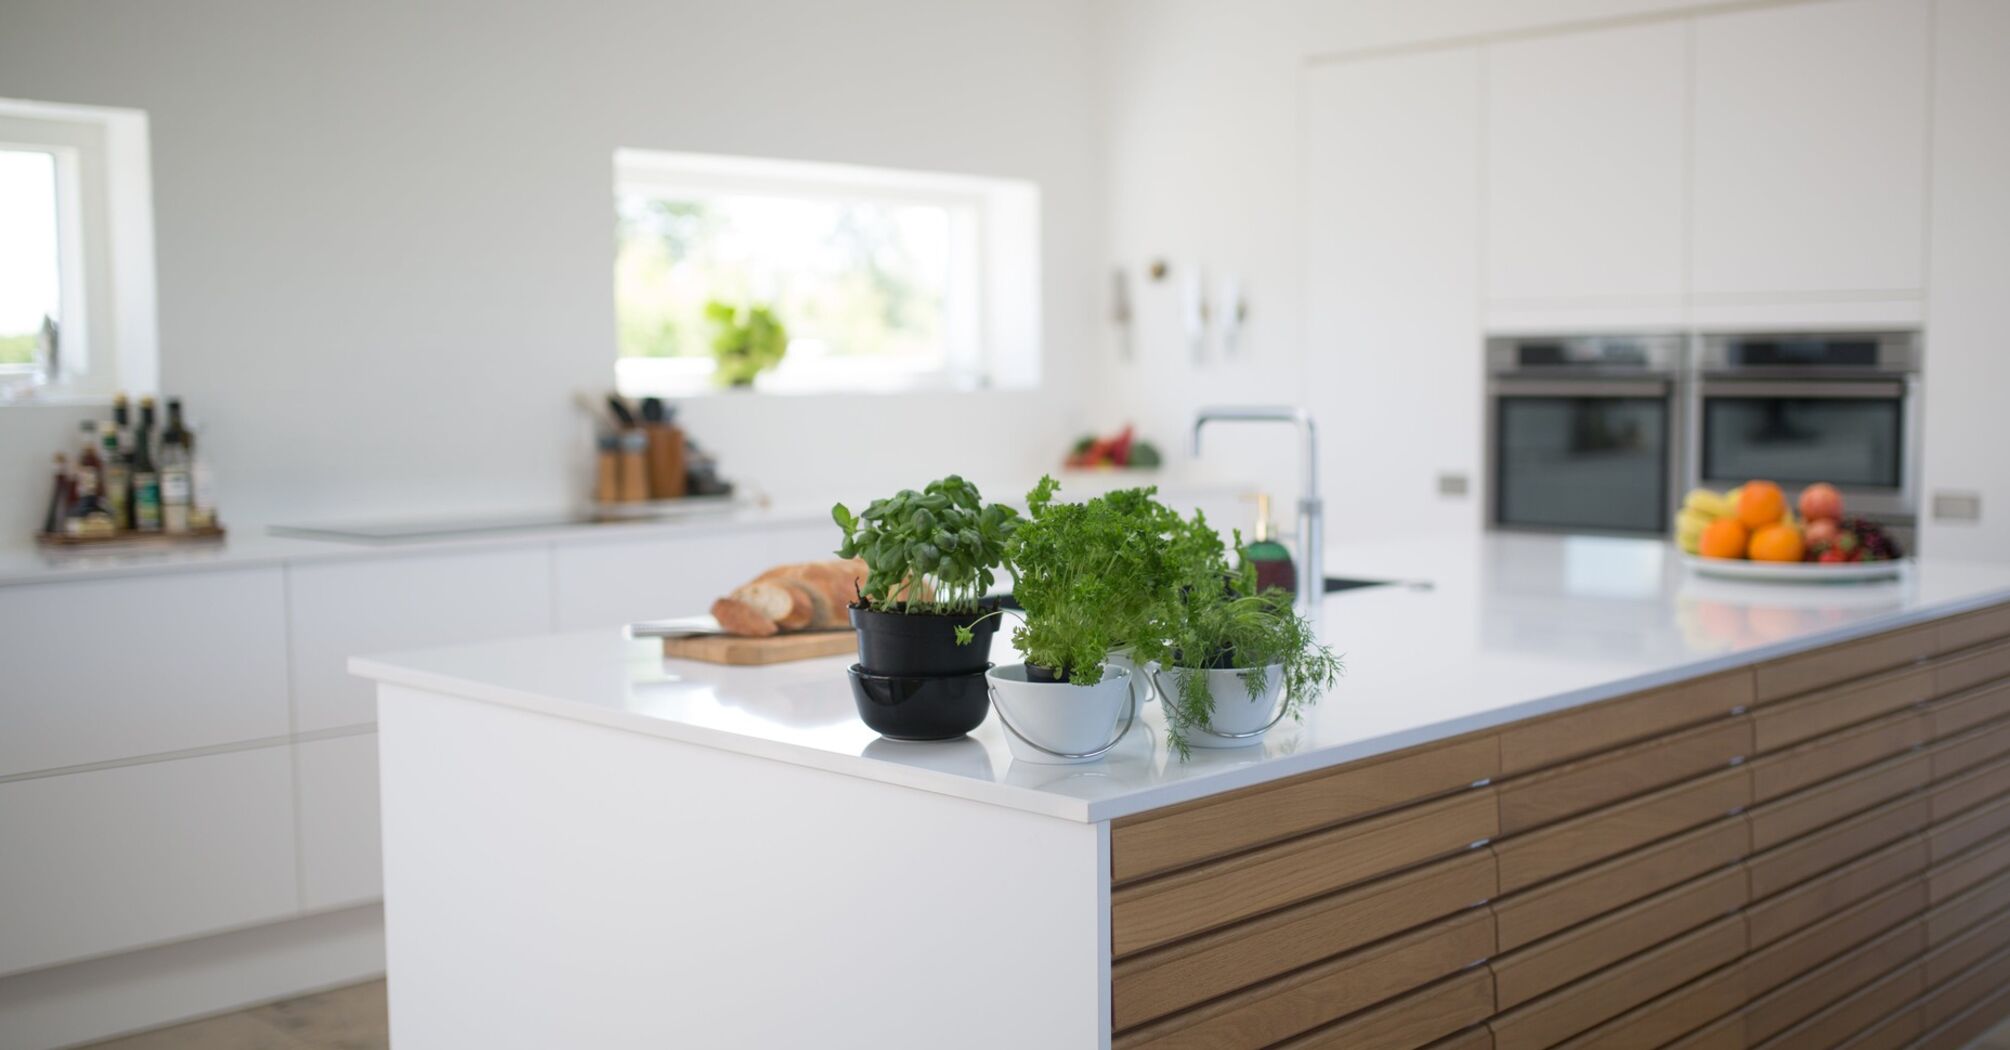 How to simplify kitchen work: 5 tips from experienced homemakers